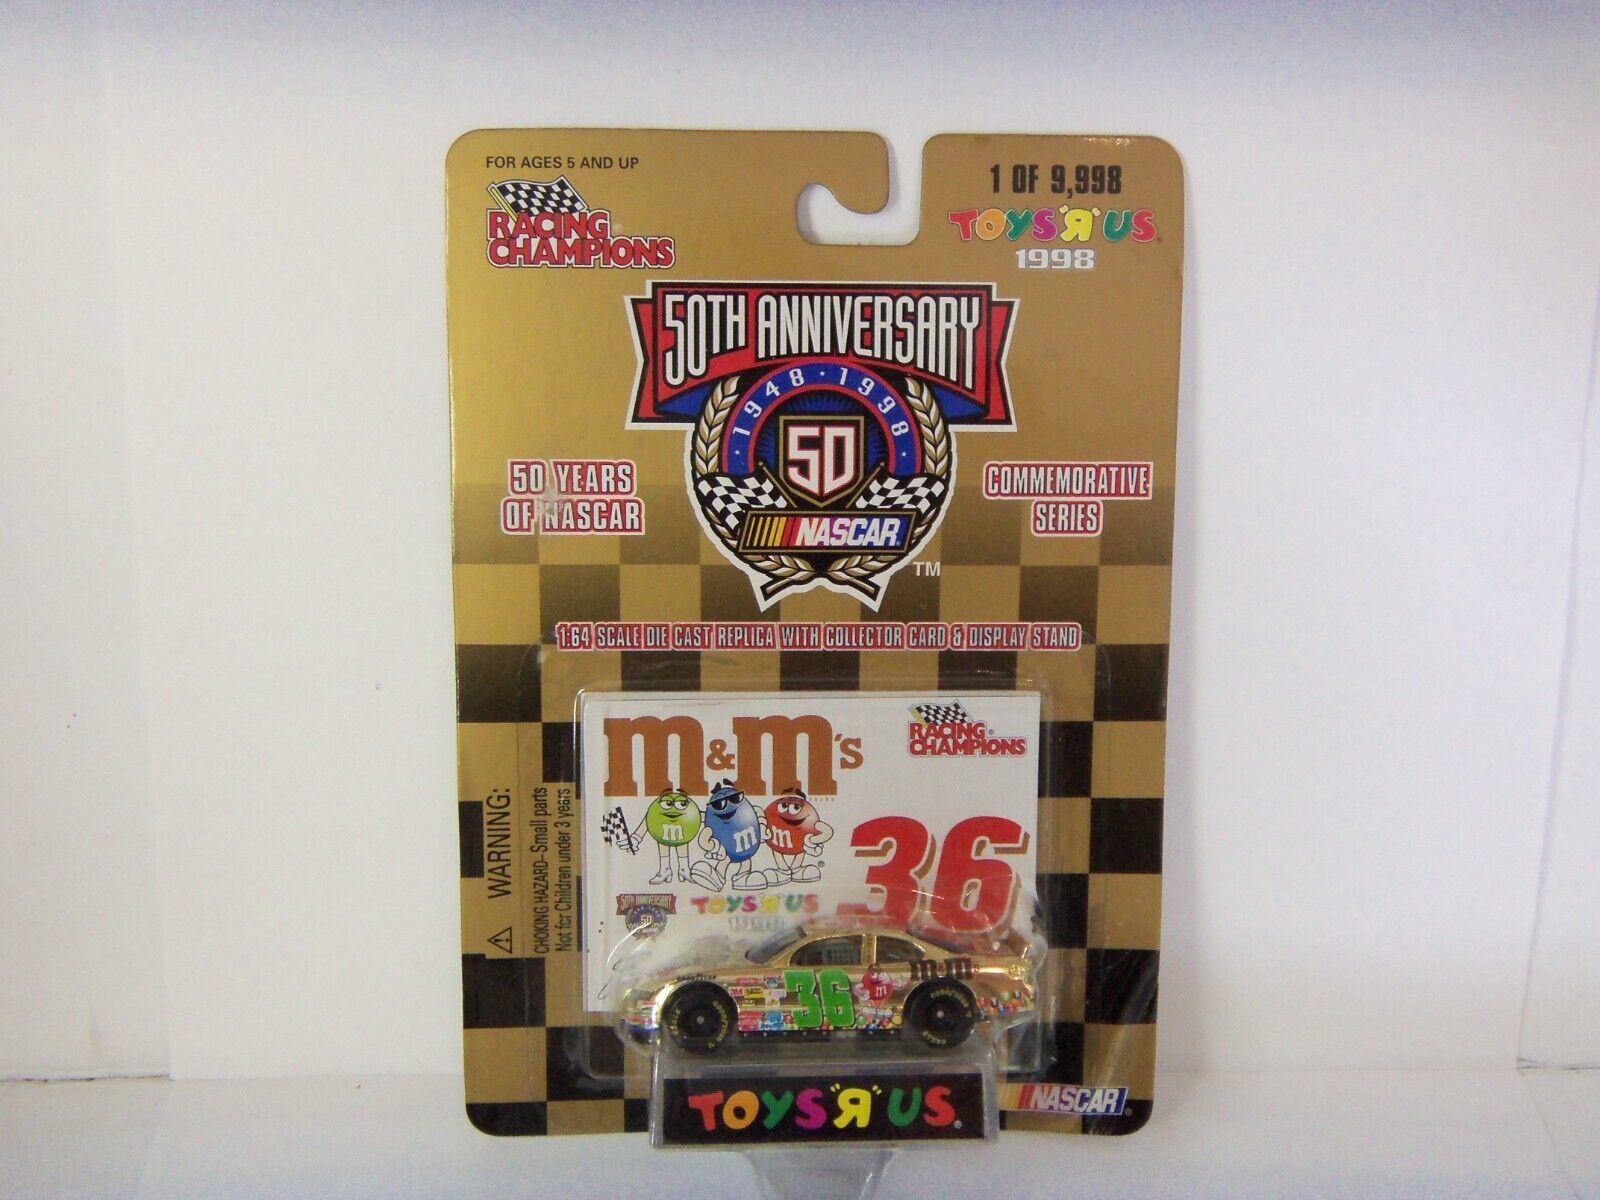 Primary image for RACING CHAMPIONS NASCAR 50th,  TOYS R US #36 M&M's